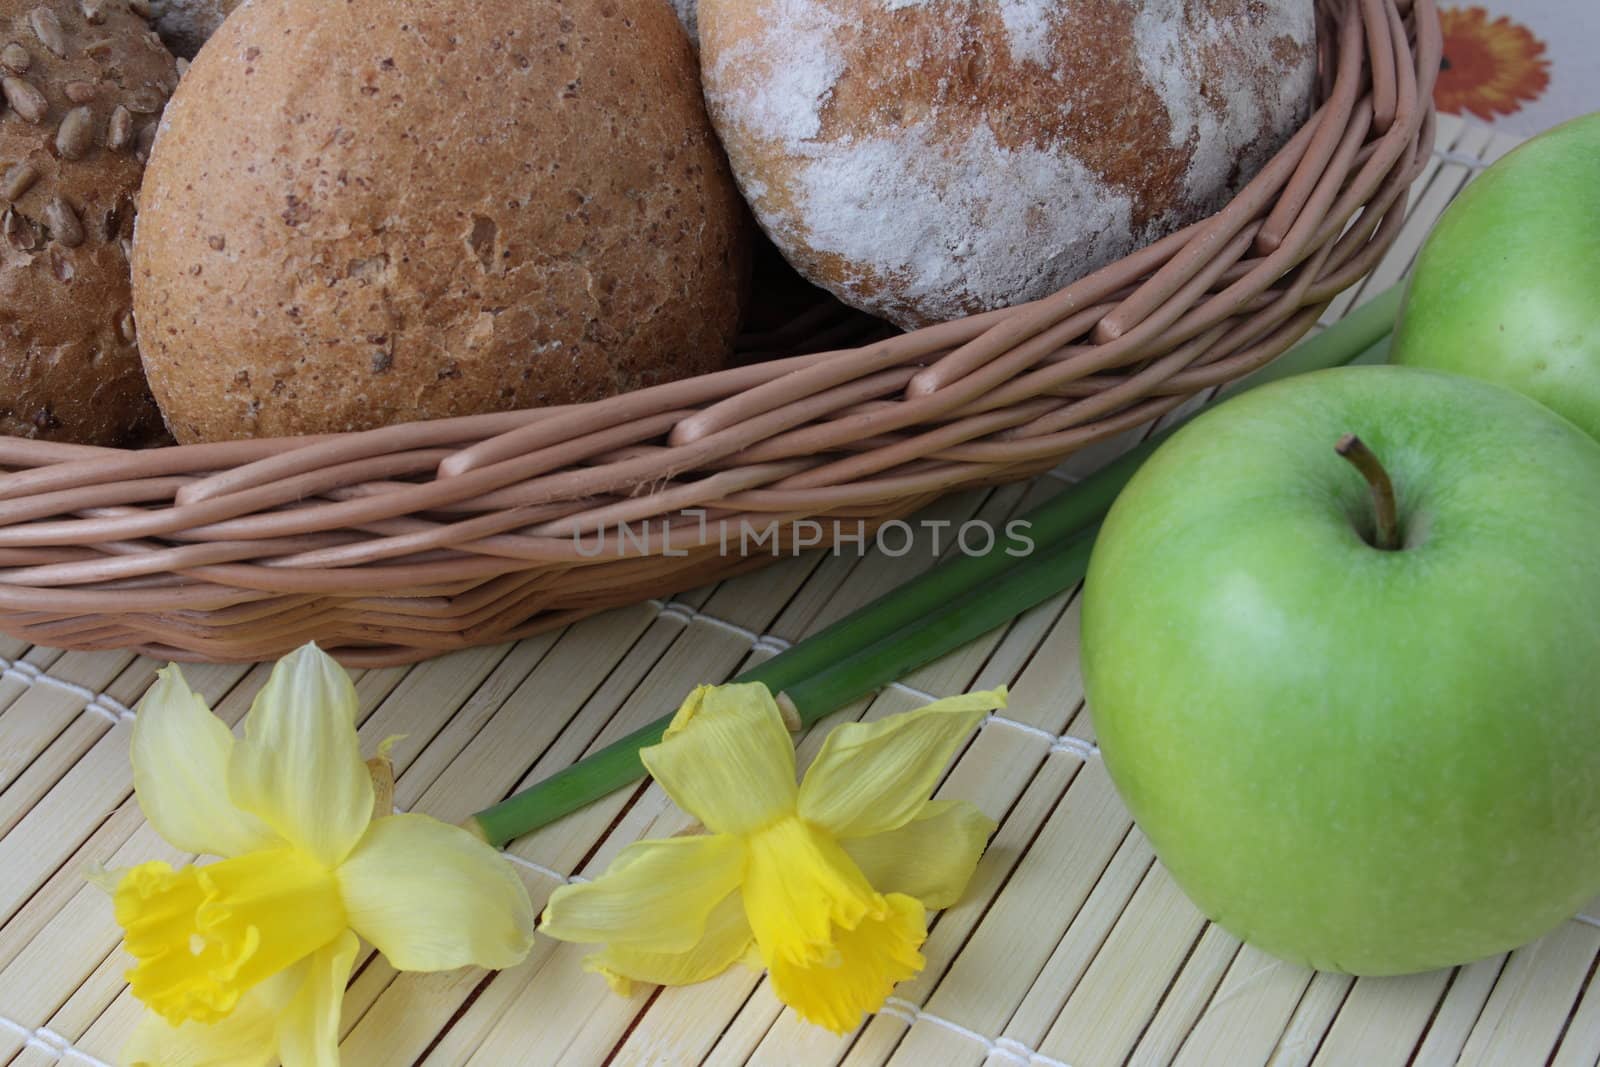 Variety of whole wheat bread in basket by BDS